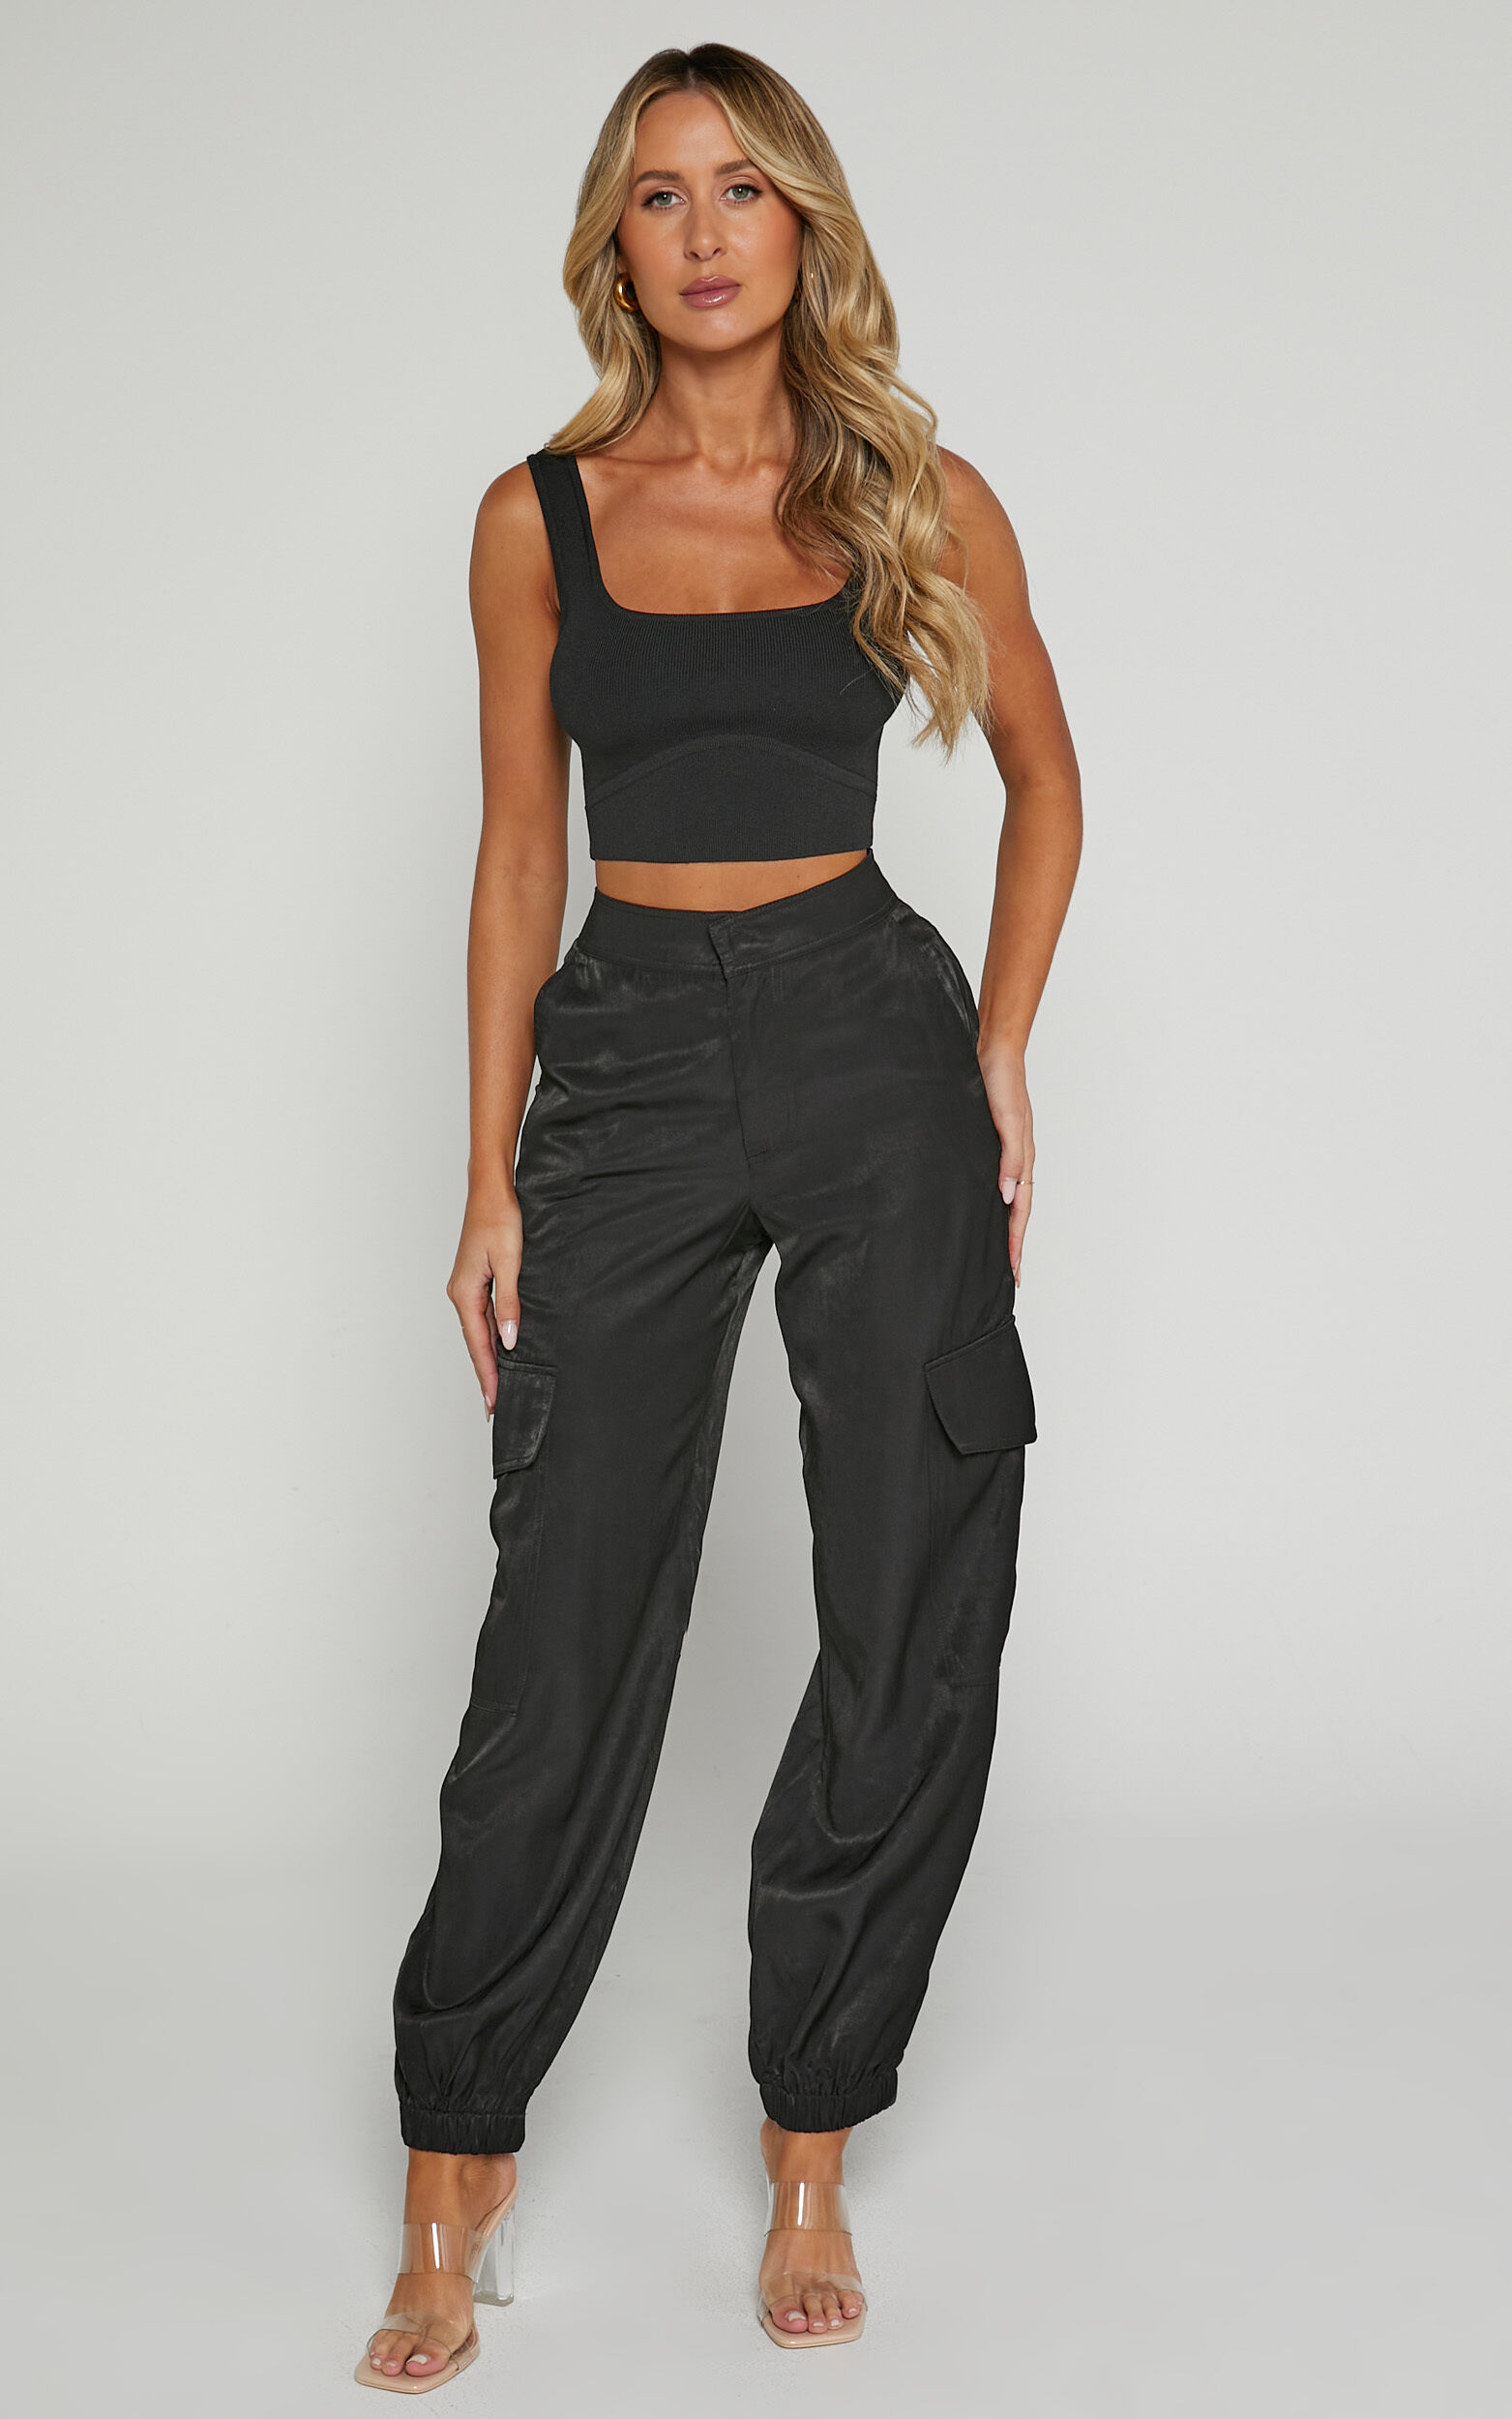 Cuffed Ankle Pants